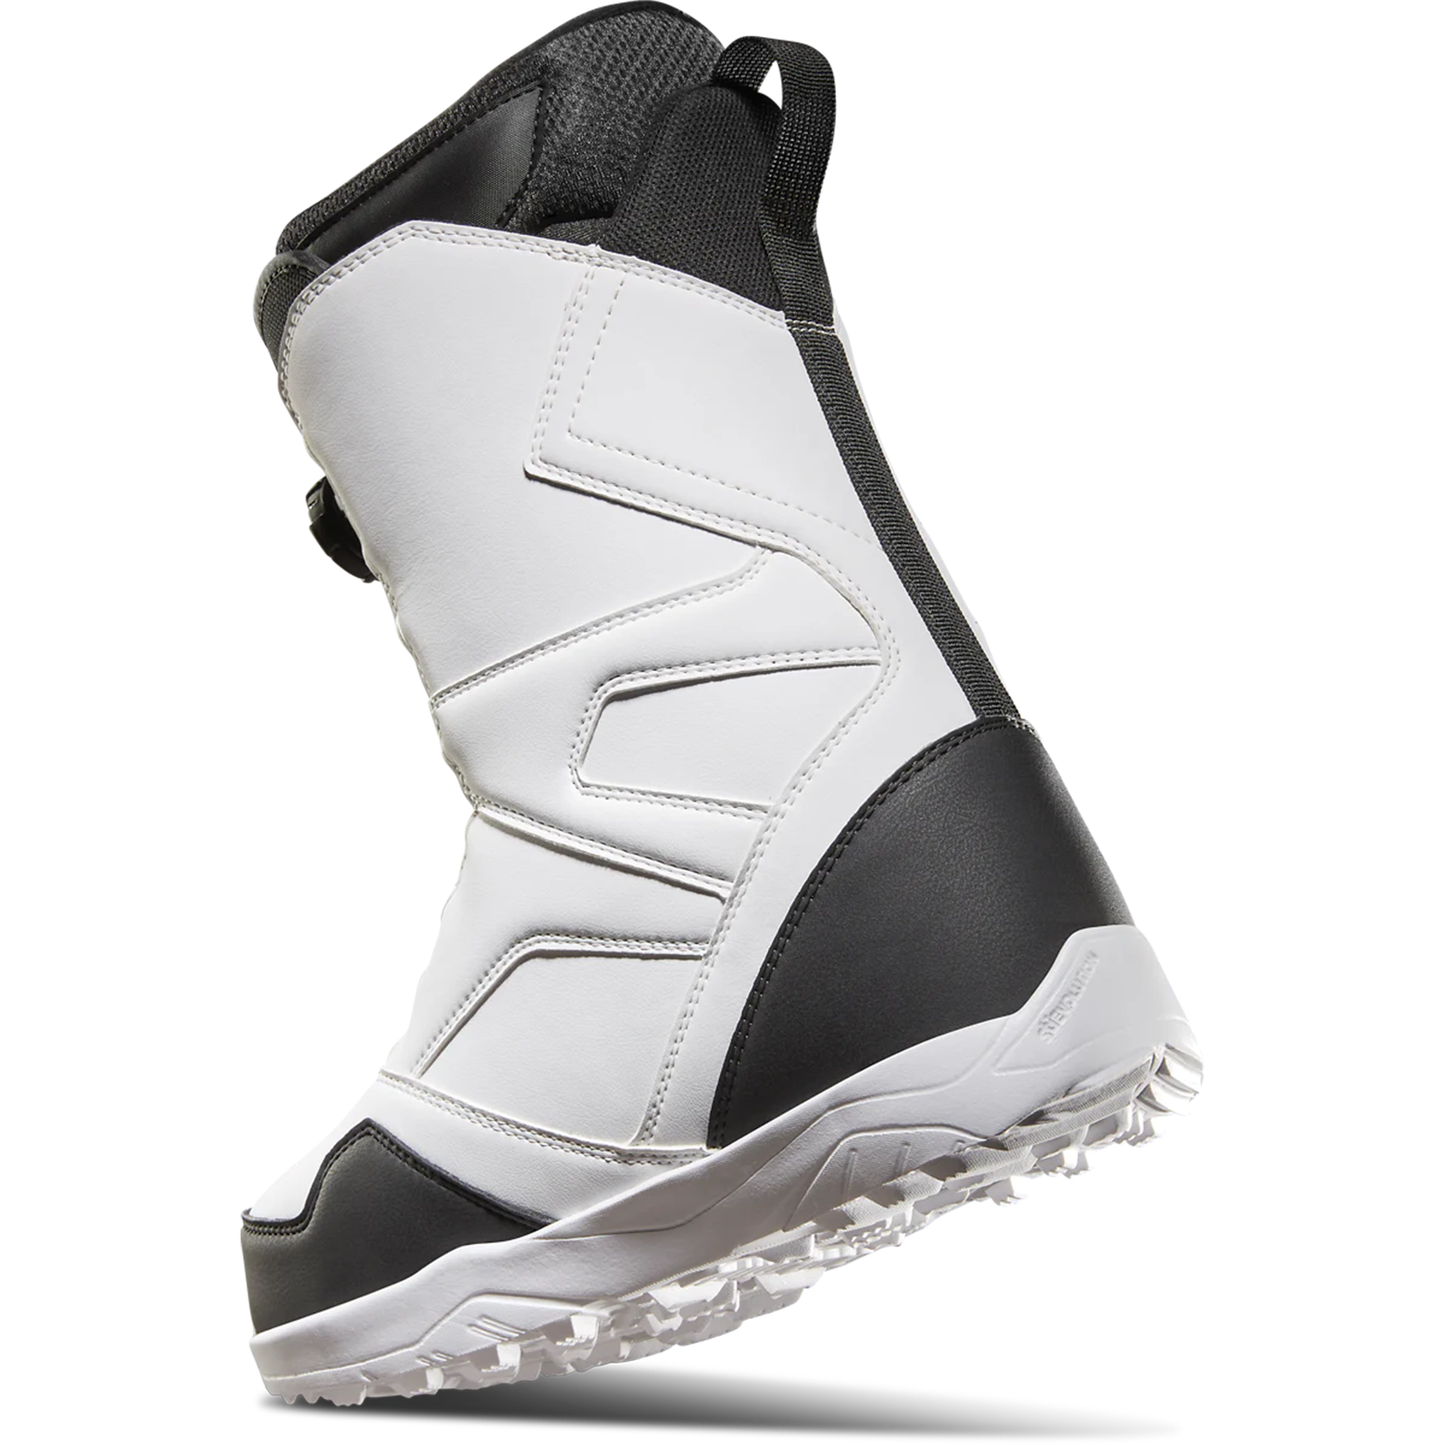 ThirtyTwo STW Double BOA Snowboard Boots White Snowboard Boots